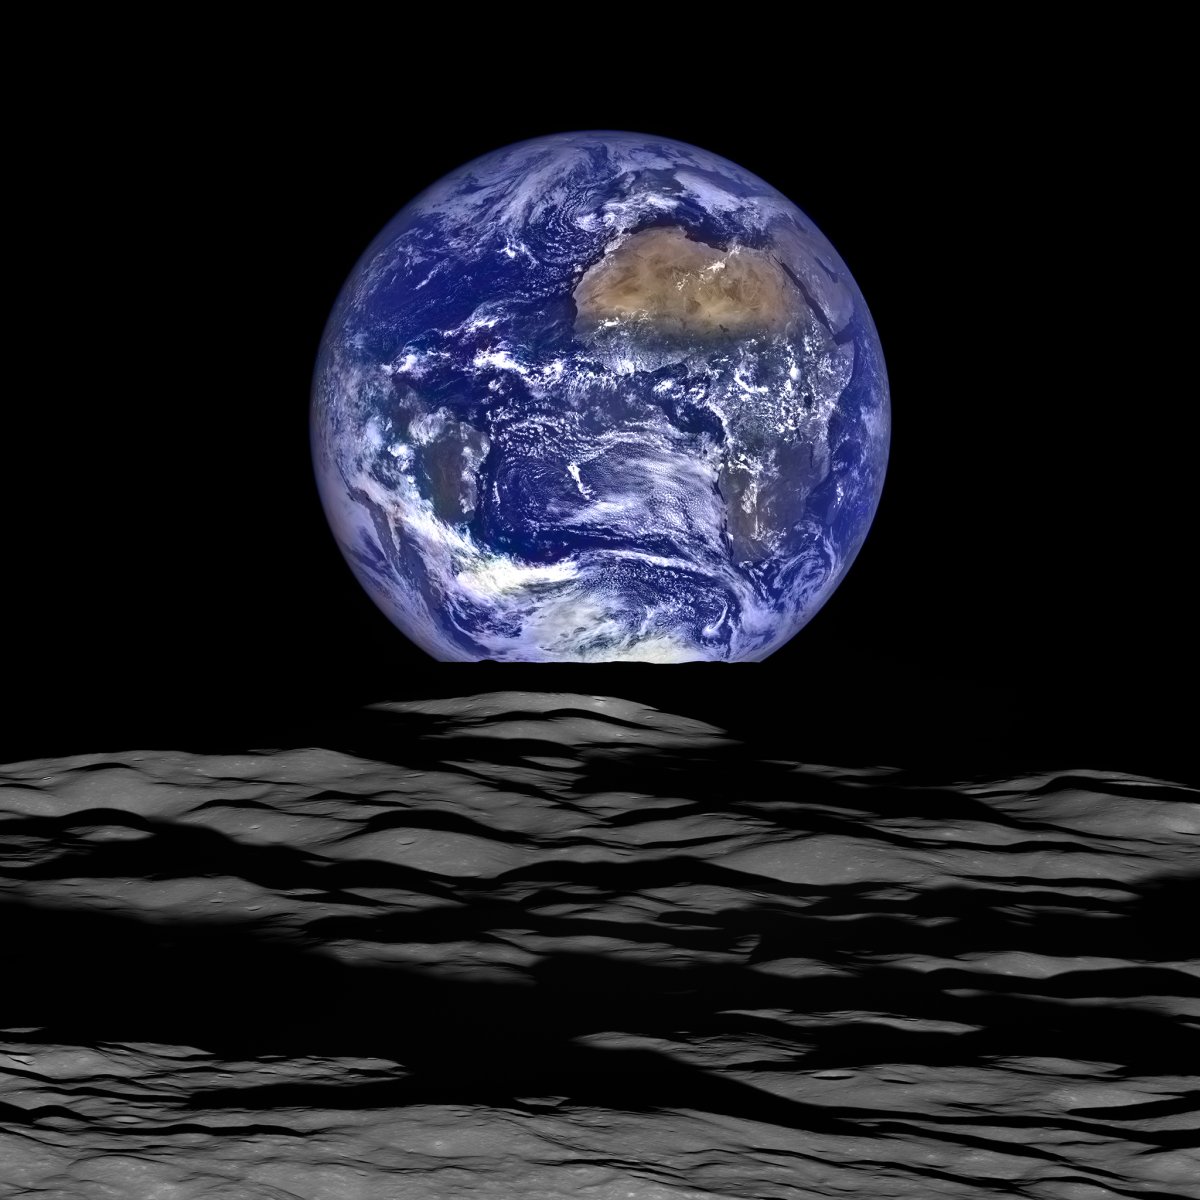 This stunning image was taken by the Lunar Reconnaissance Orbiter 134 km above the moon.